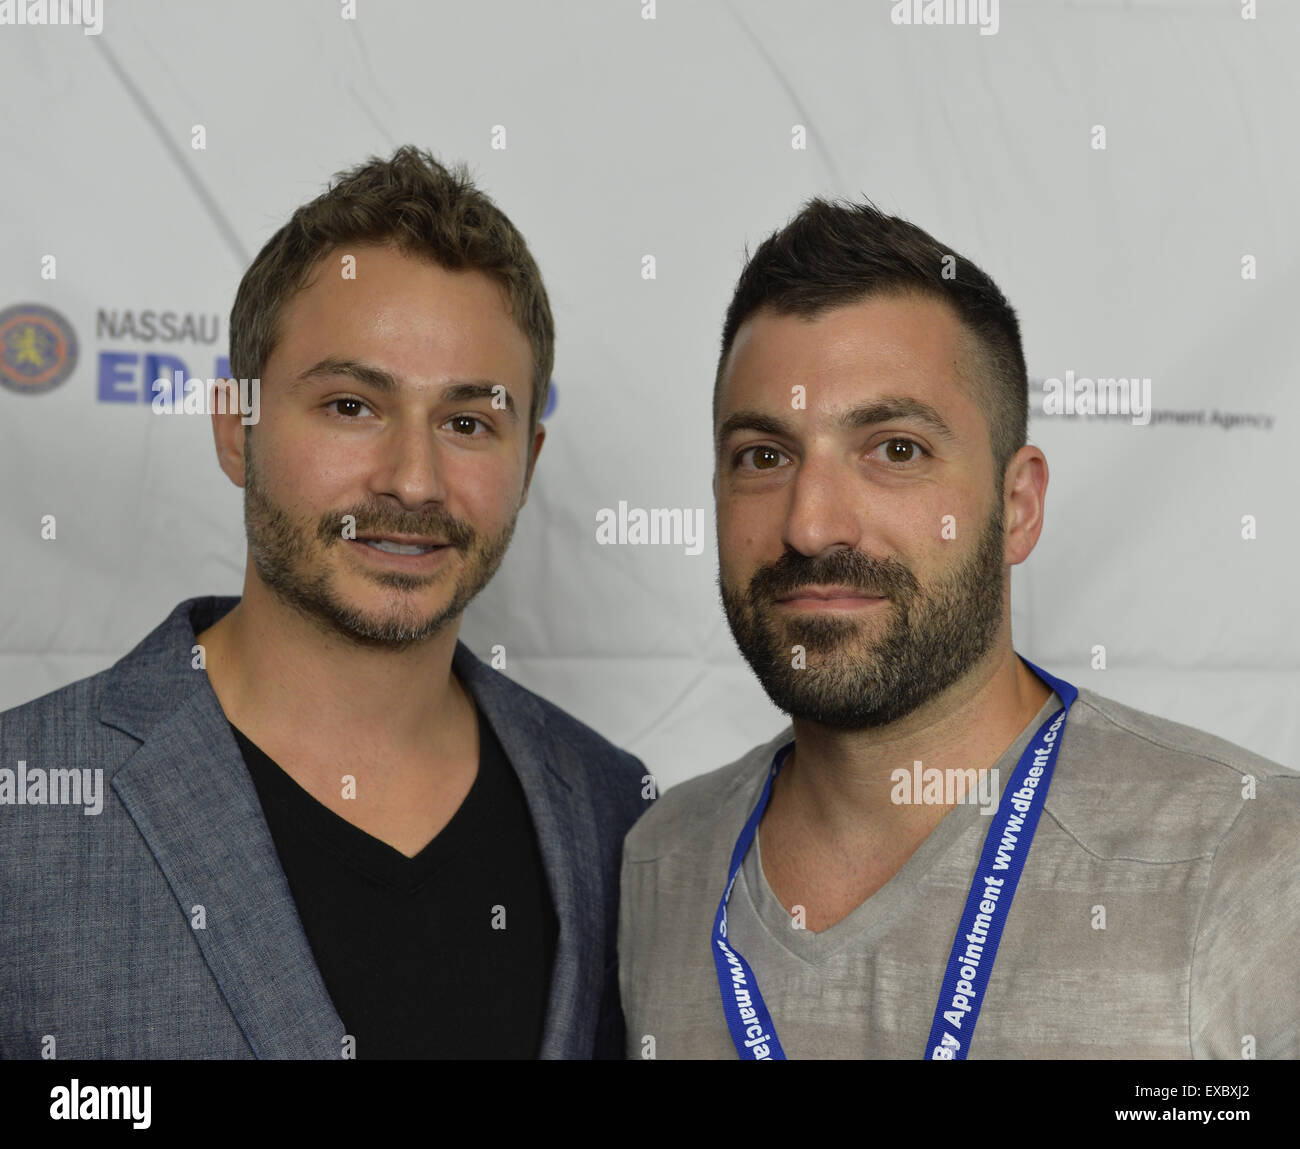 July 10, 2015 - Bellmore, New York, United States - L-R, JORDAN HOROWITZ and FRANK FERENDO, Co-Directors and Producers of the documentary ANGEL OF NANJING, attend the Official Opening Night Reception of LIIFE, Long Island International Film Expo. The film is about Chen Si who has saved over 300 people from commiting suicide at the Yangtze River Bridge in Nanjing, the most popular place in the world to commit suicide. LIIFE events, including screenings nextdoor at Bellmore Movies, panels, and ceremonies, span from July 8 through July 16. (Credit Image: © Ann Parry/ZUMA Wire) Stock Photo